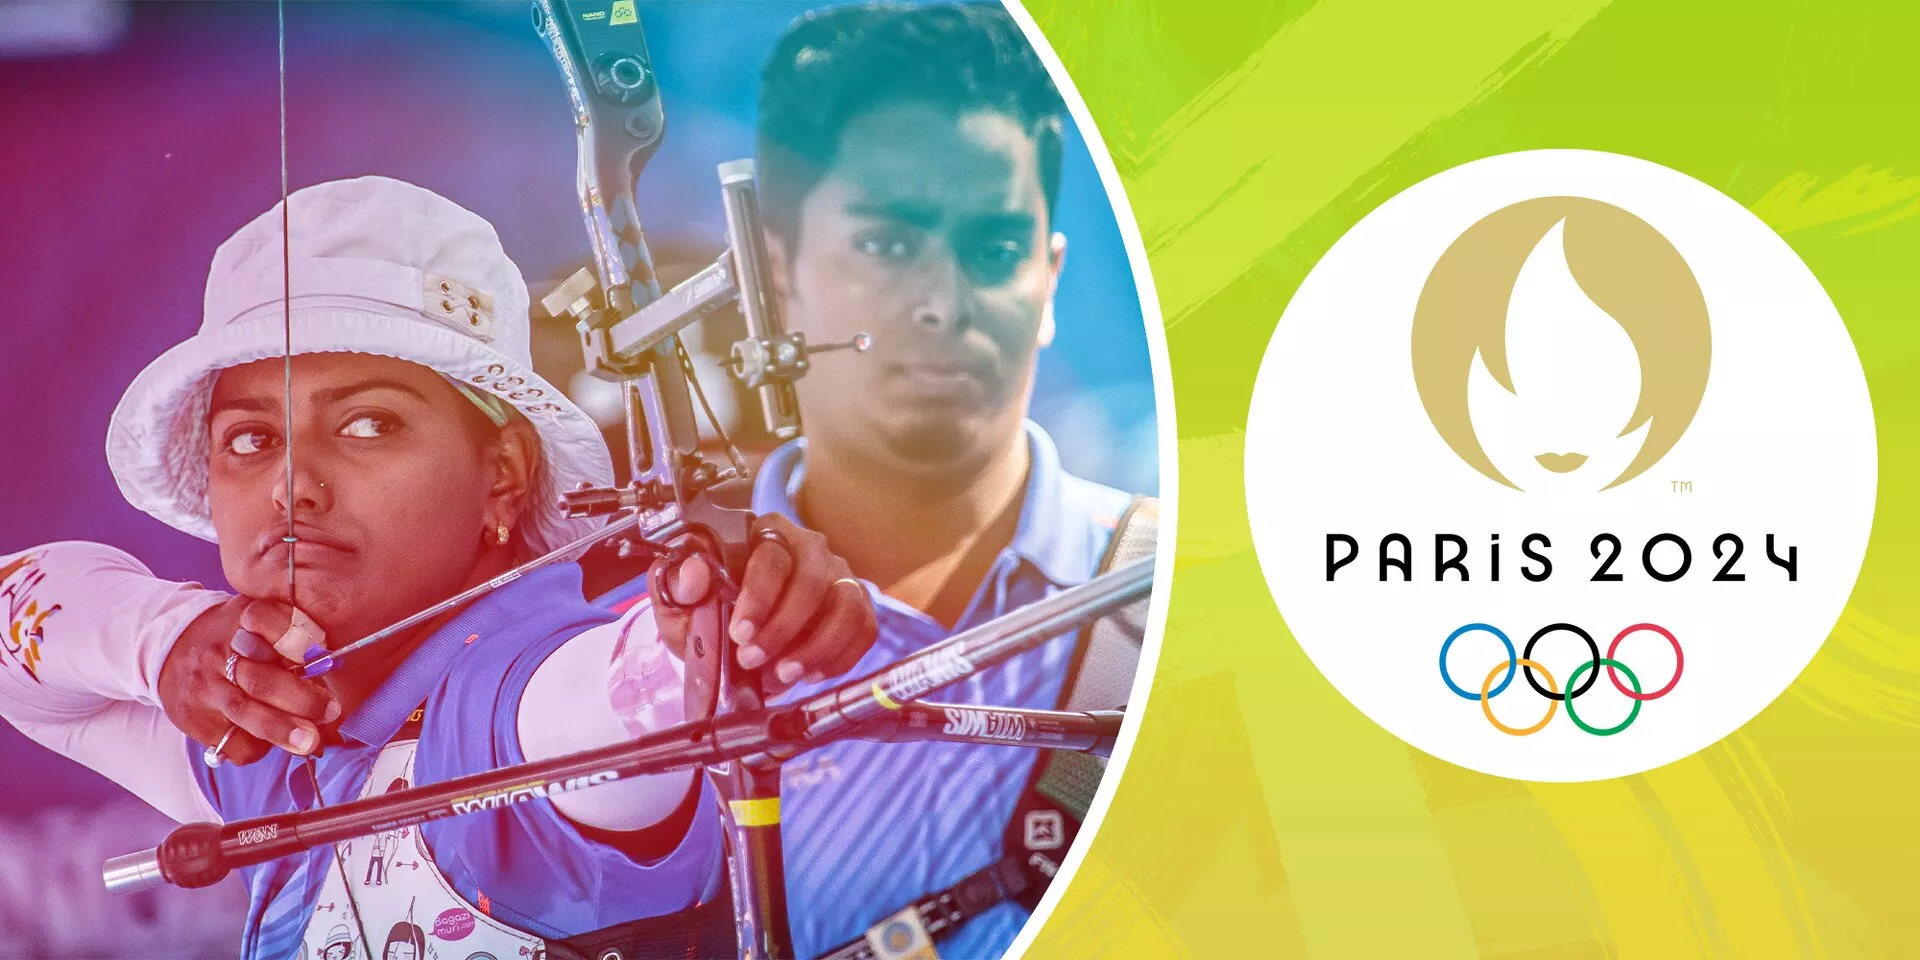 Explained Qualification process for archery at Paris Olympics